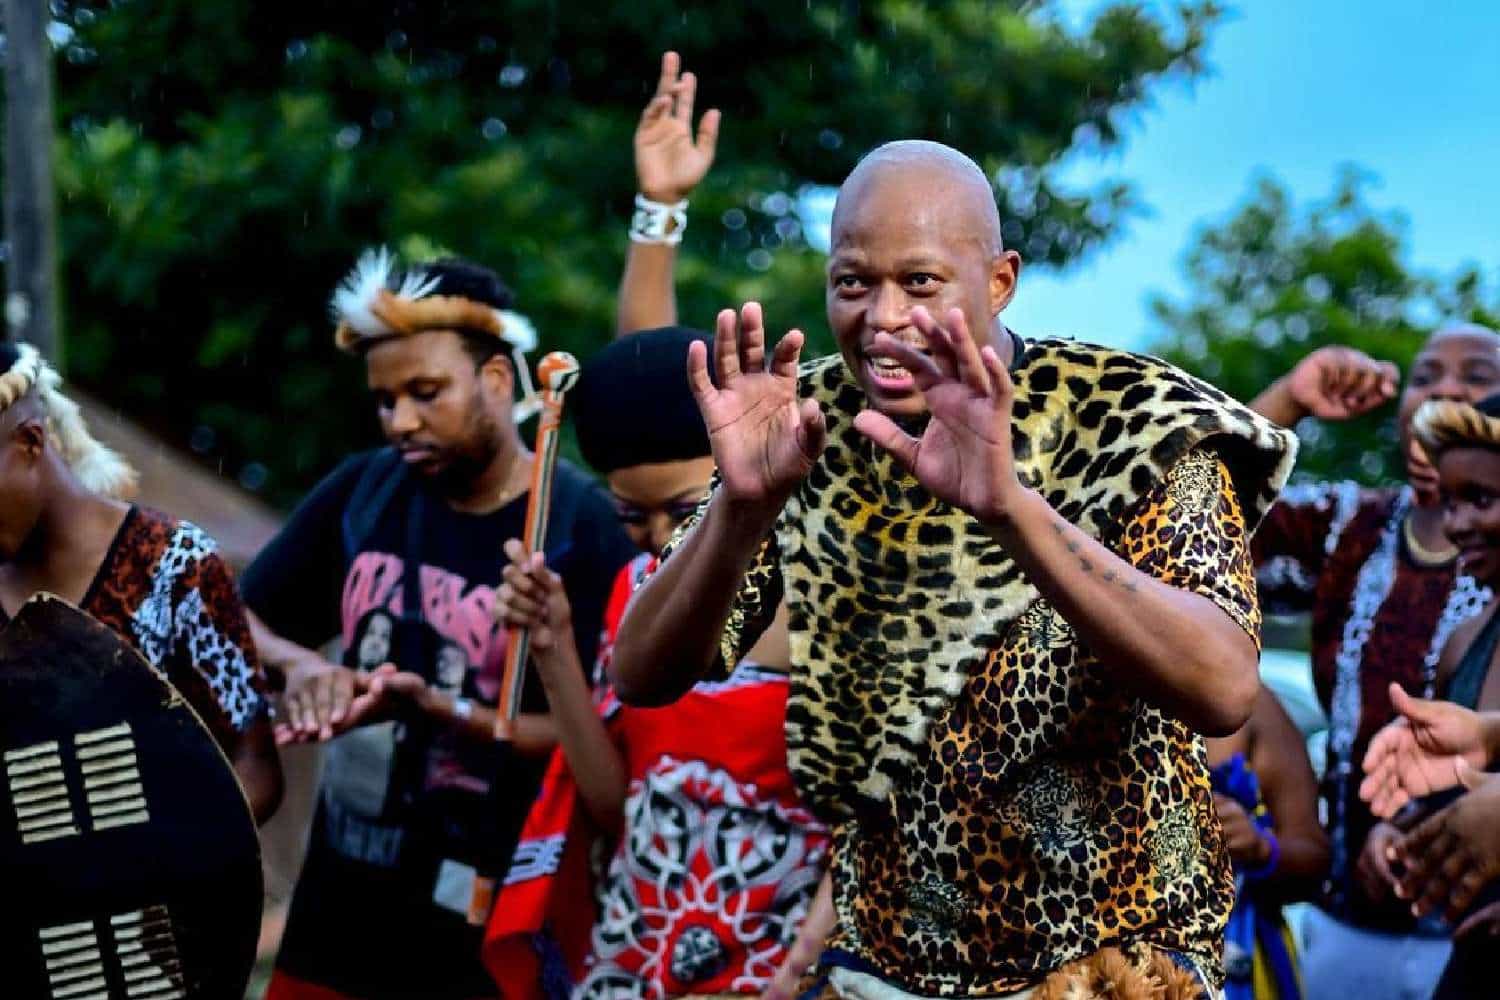 KZN government to pay half of Mampintsha's funeral costs